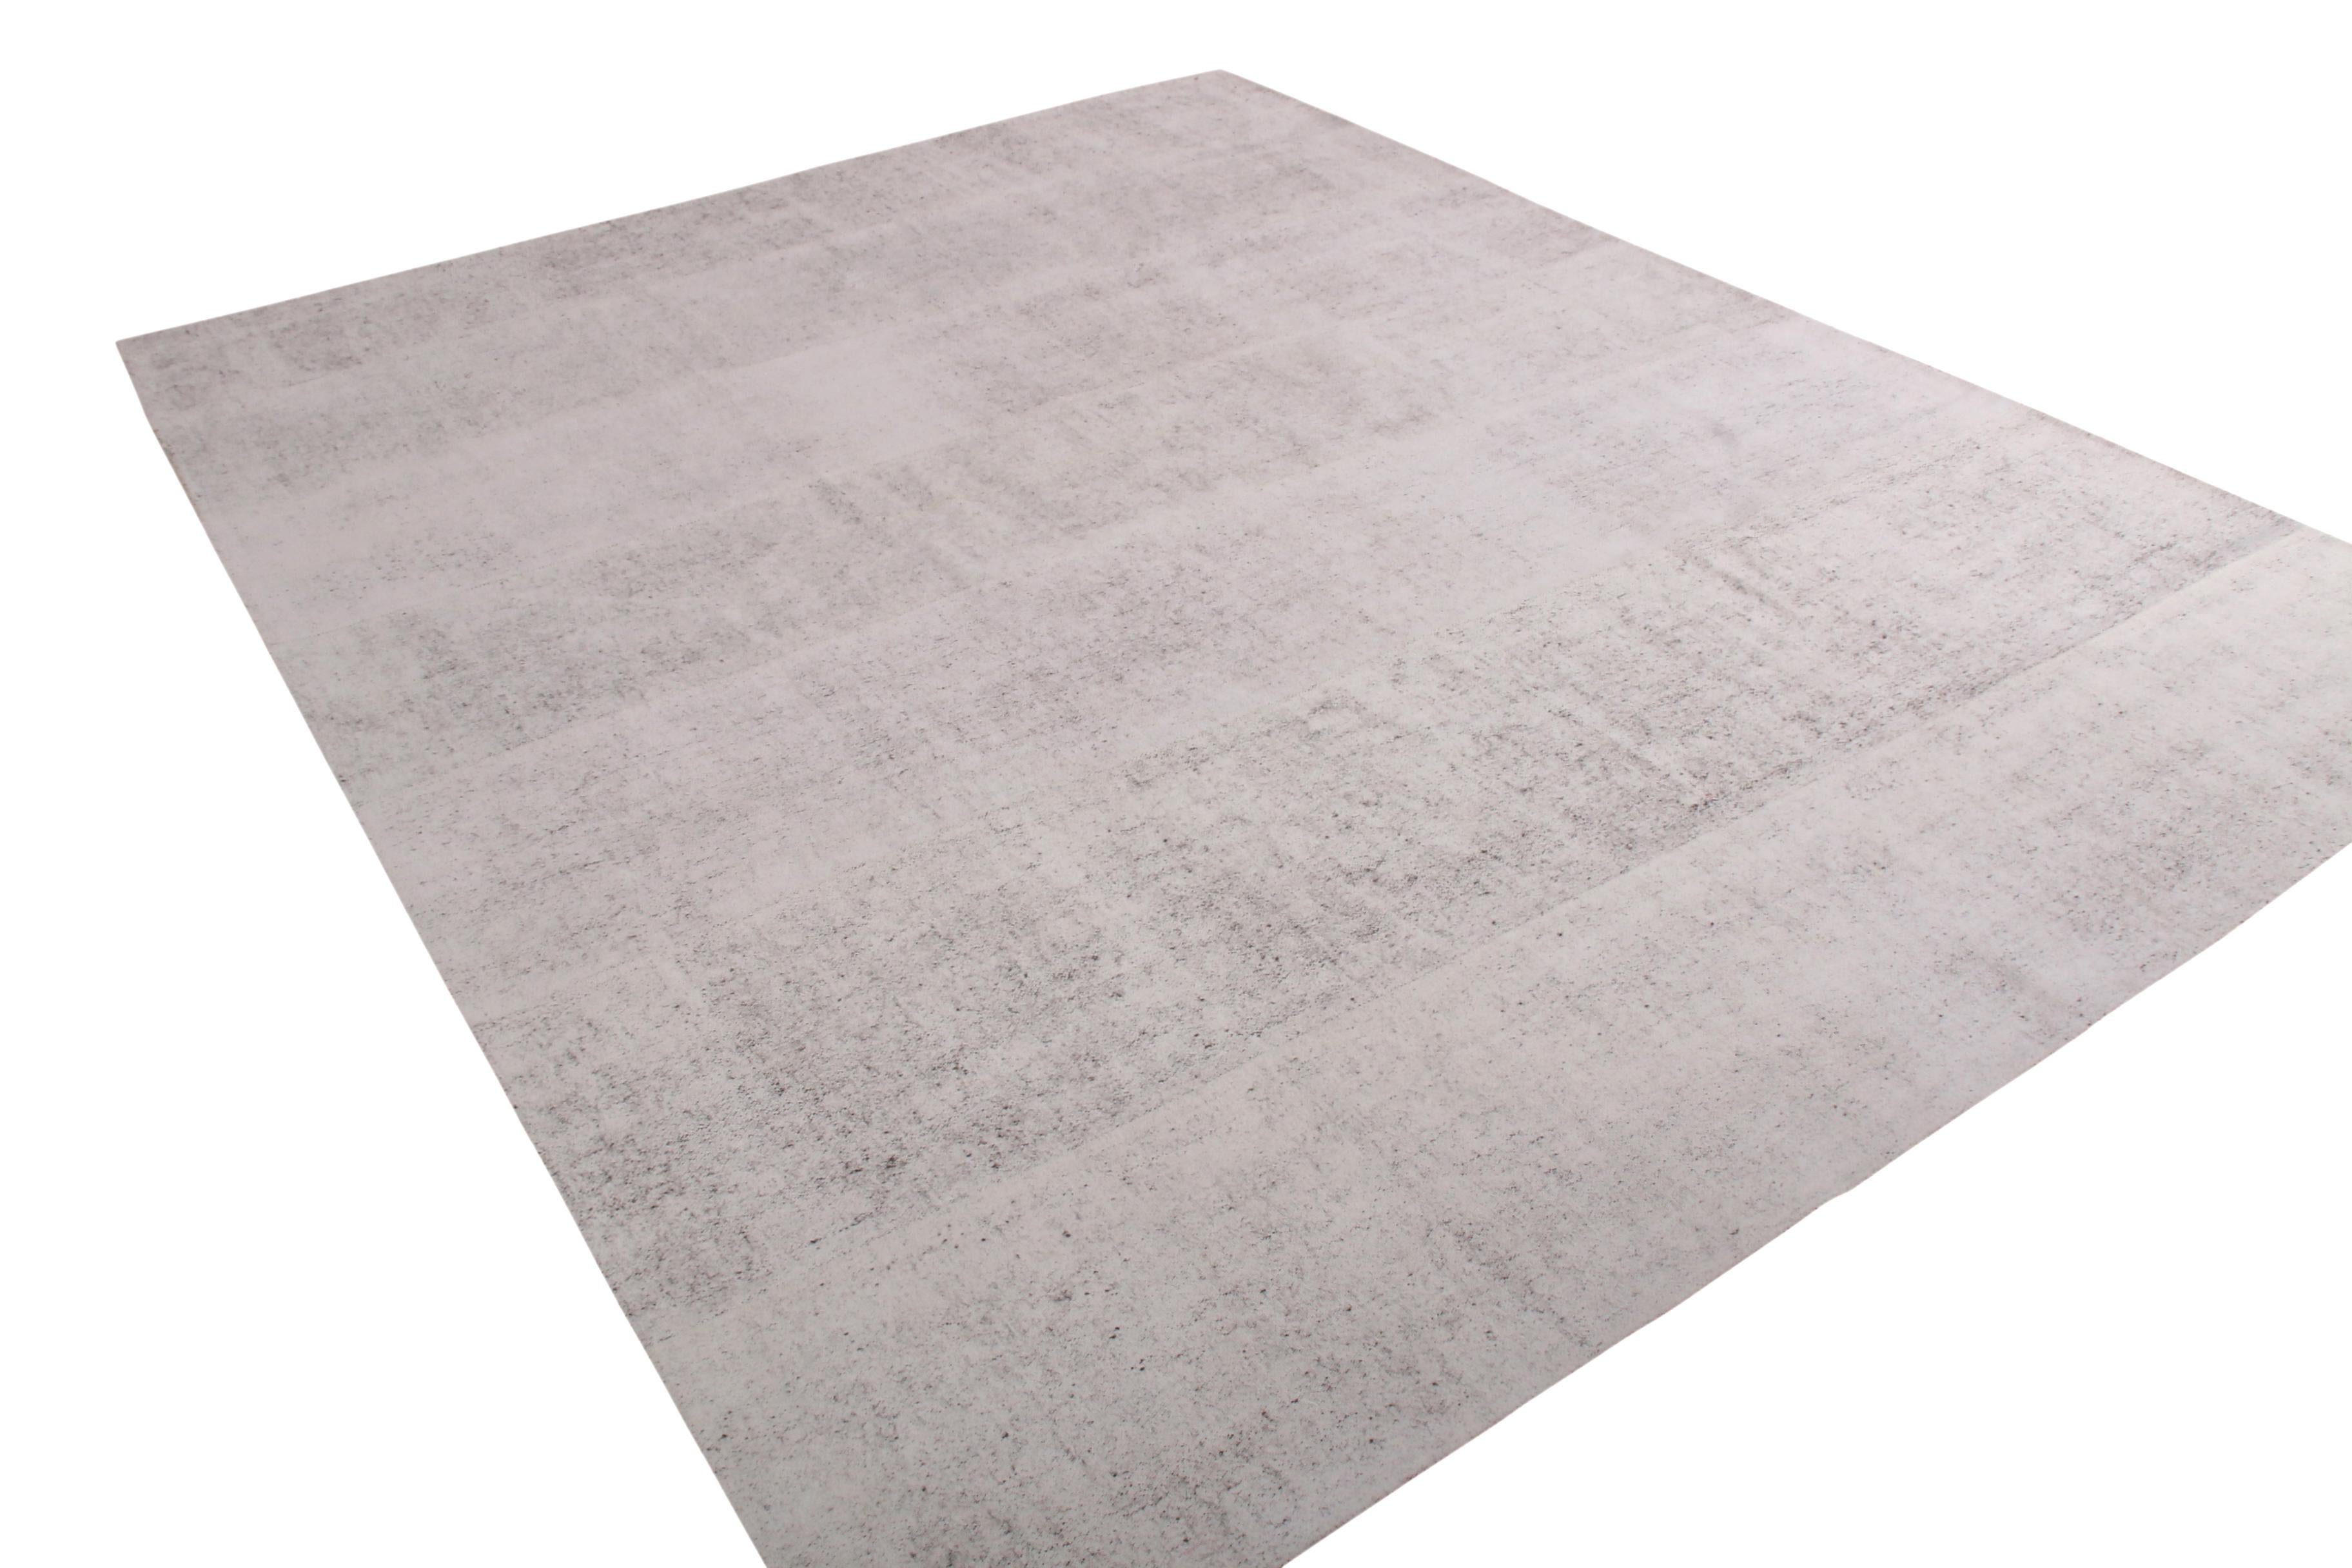 Turkish Vintage Kilim Rug in Salt and Pepper White and Black, Panel Woven by Rug & Kilim For Sale